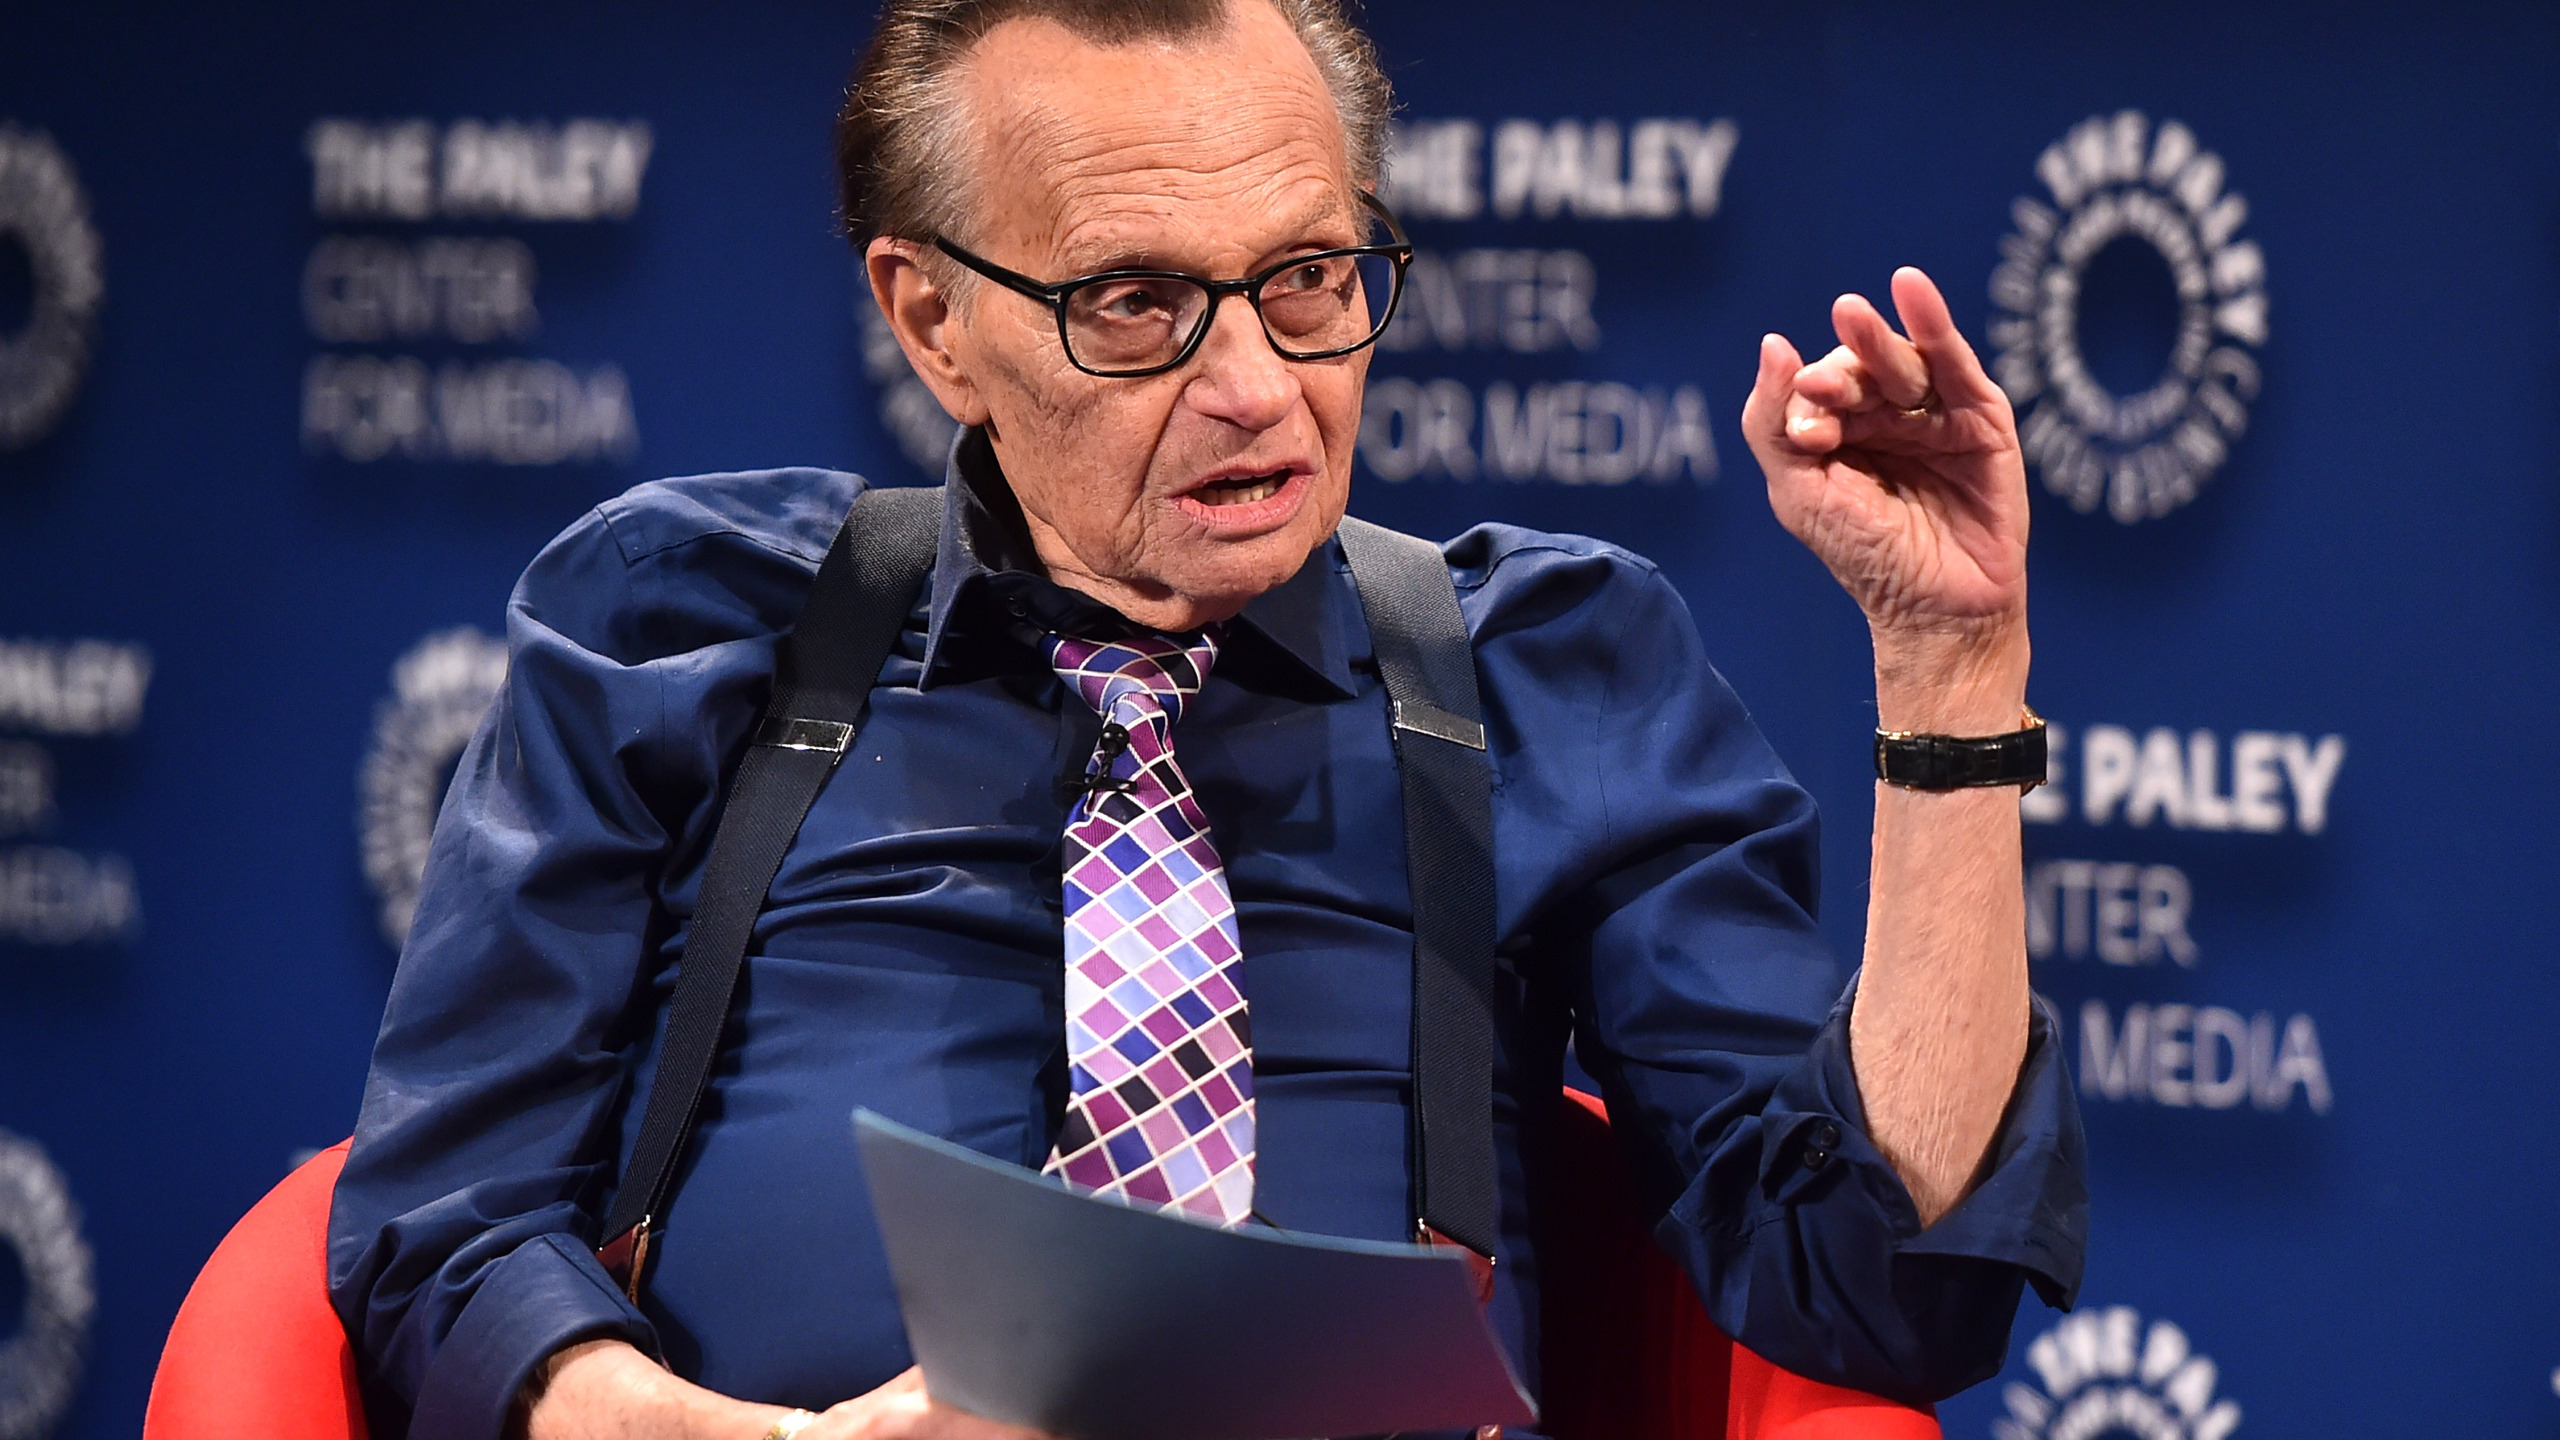 Larry king attends The Paley Center For Media Presents: A Special Evening With Dionne Warwick: Then Came You at Th